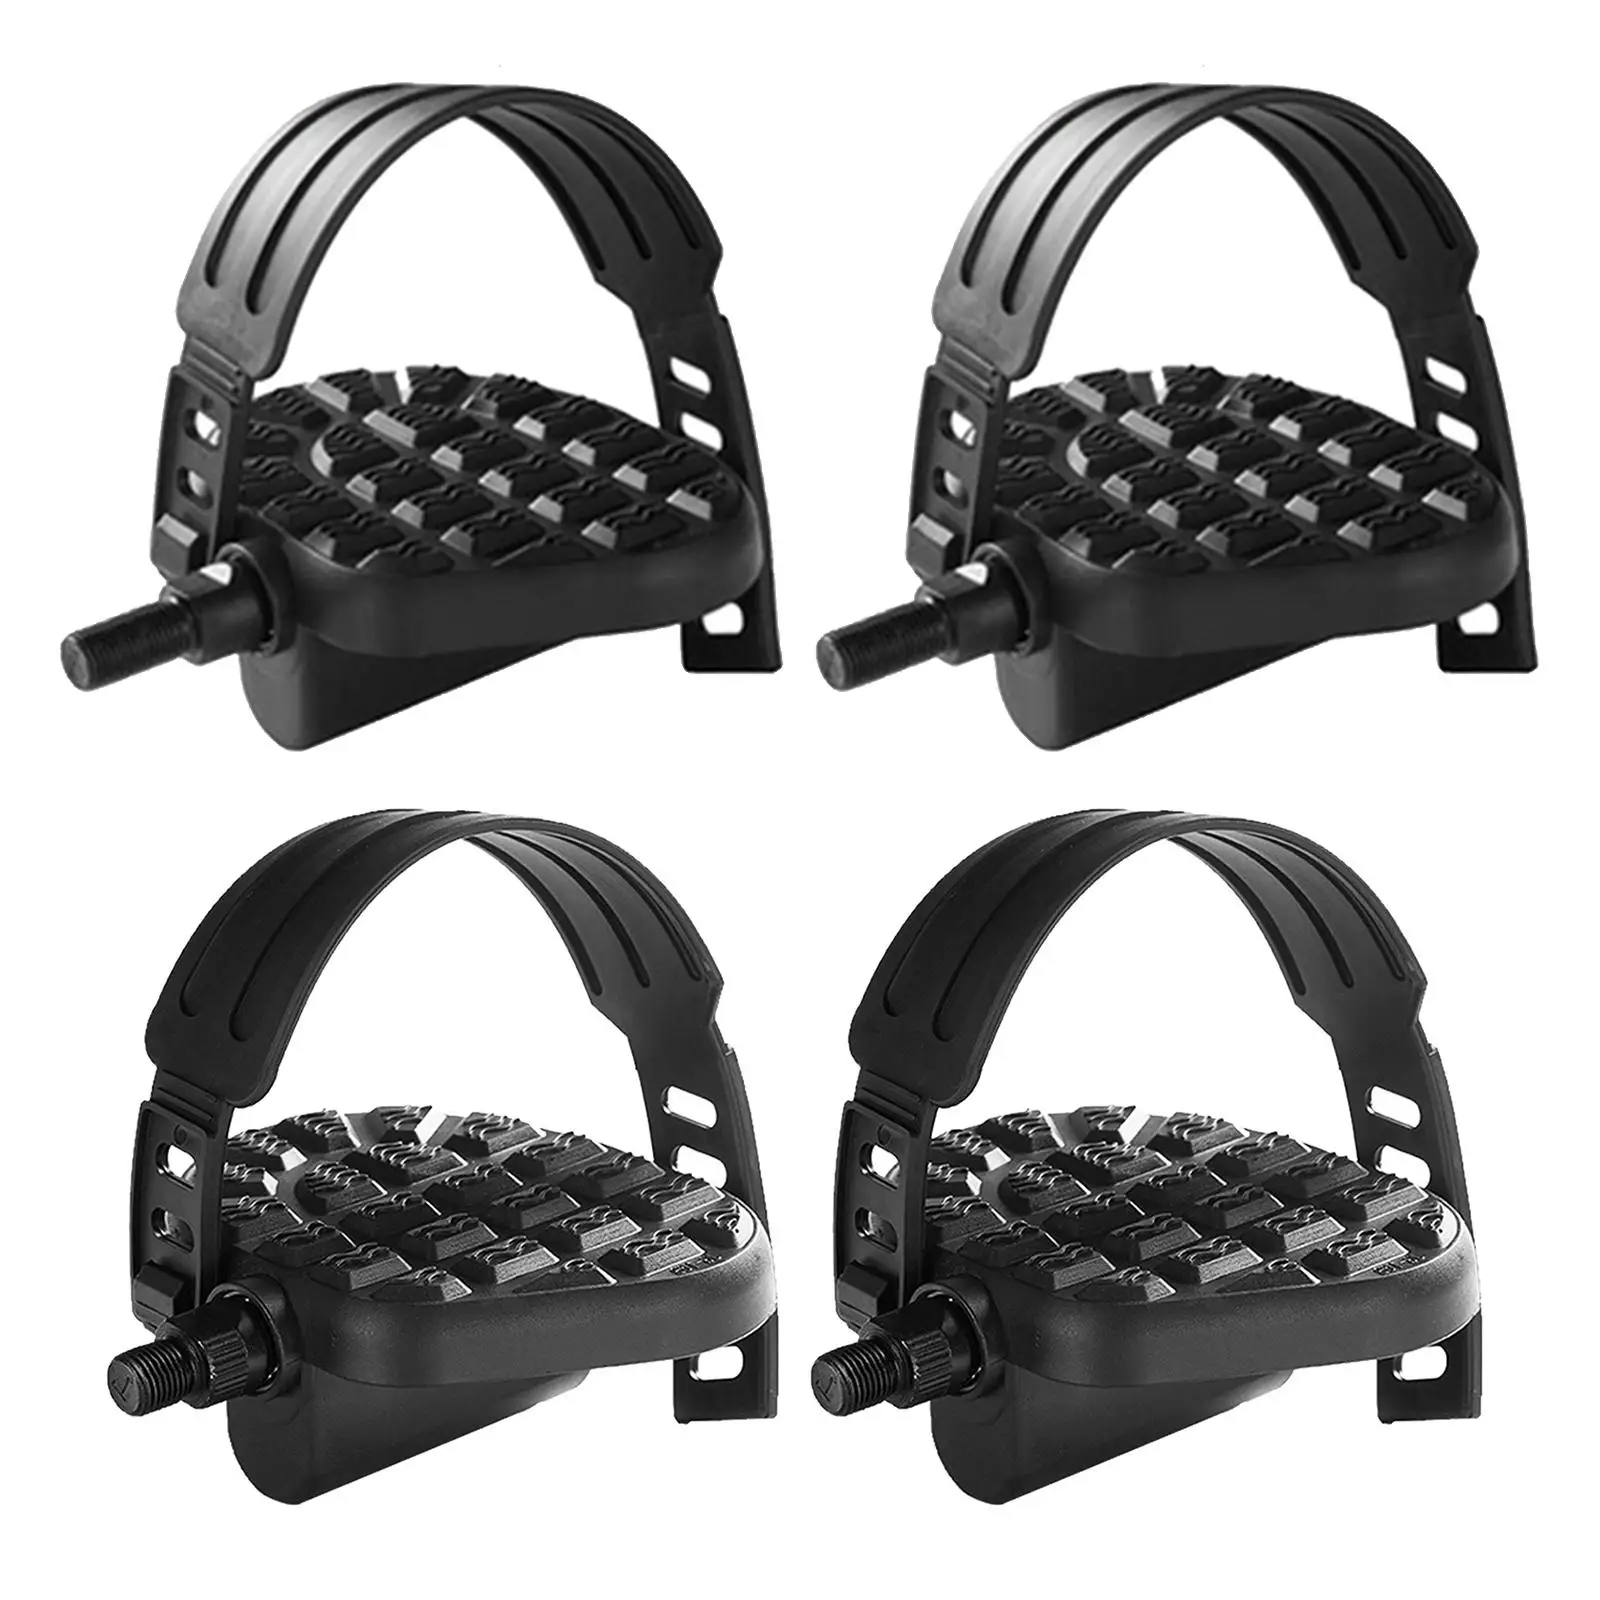 1 Pair of Exercise Bike Pedals with Adjustable Straps Set Bicycle Cycle Home Gym Mtb Road Bike Pedals Bicycle Parts Components